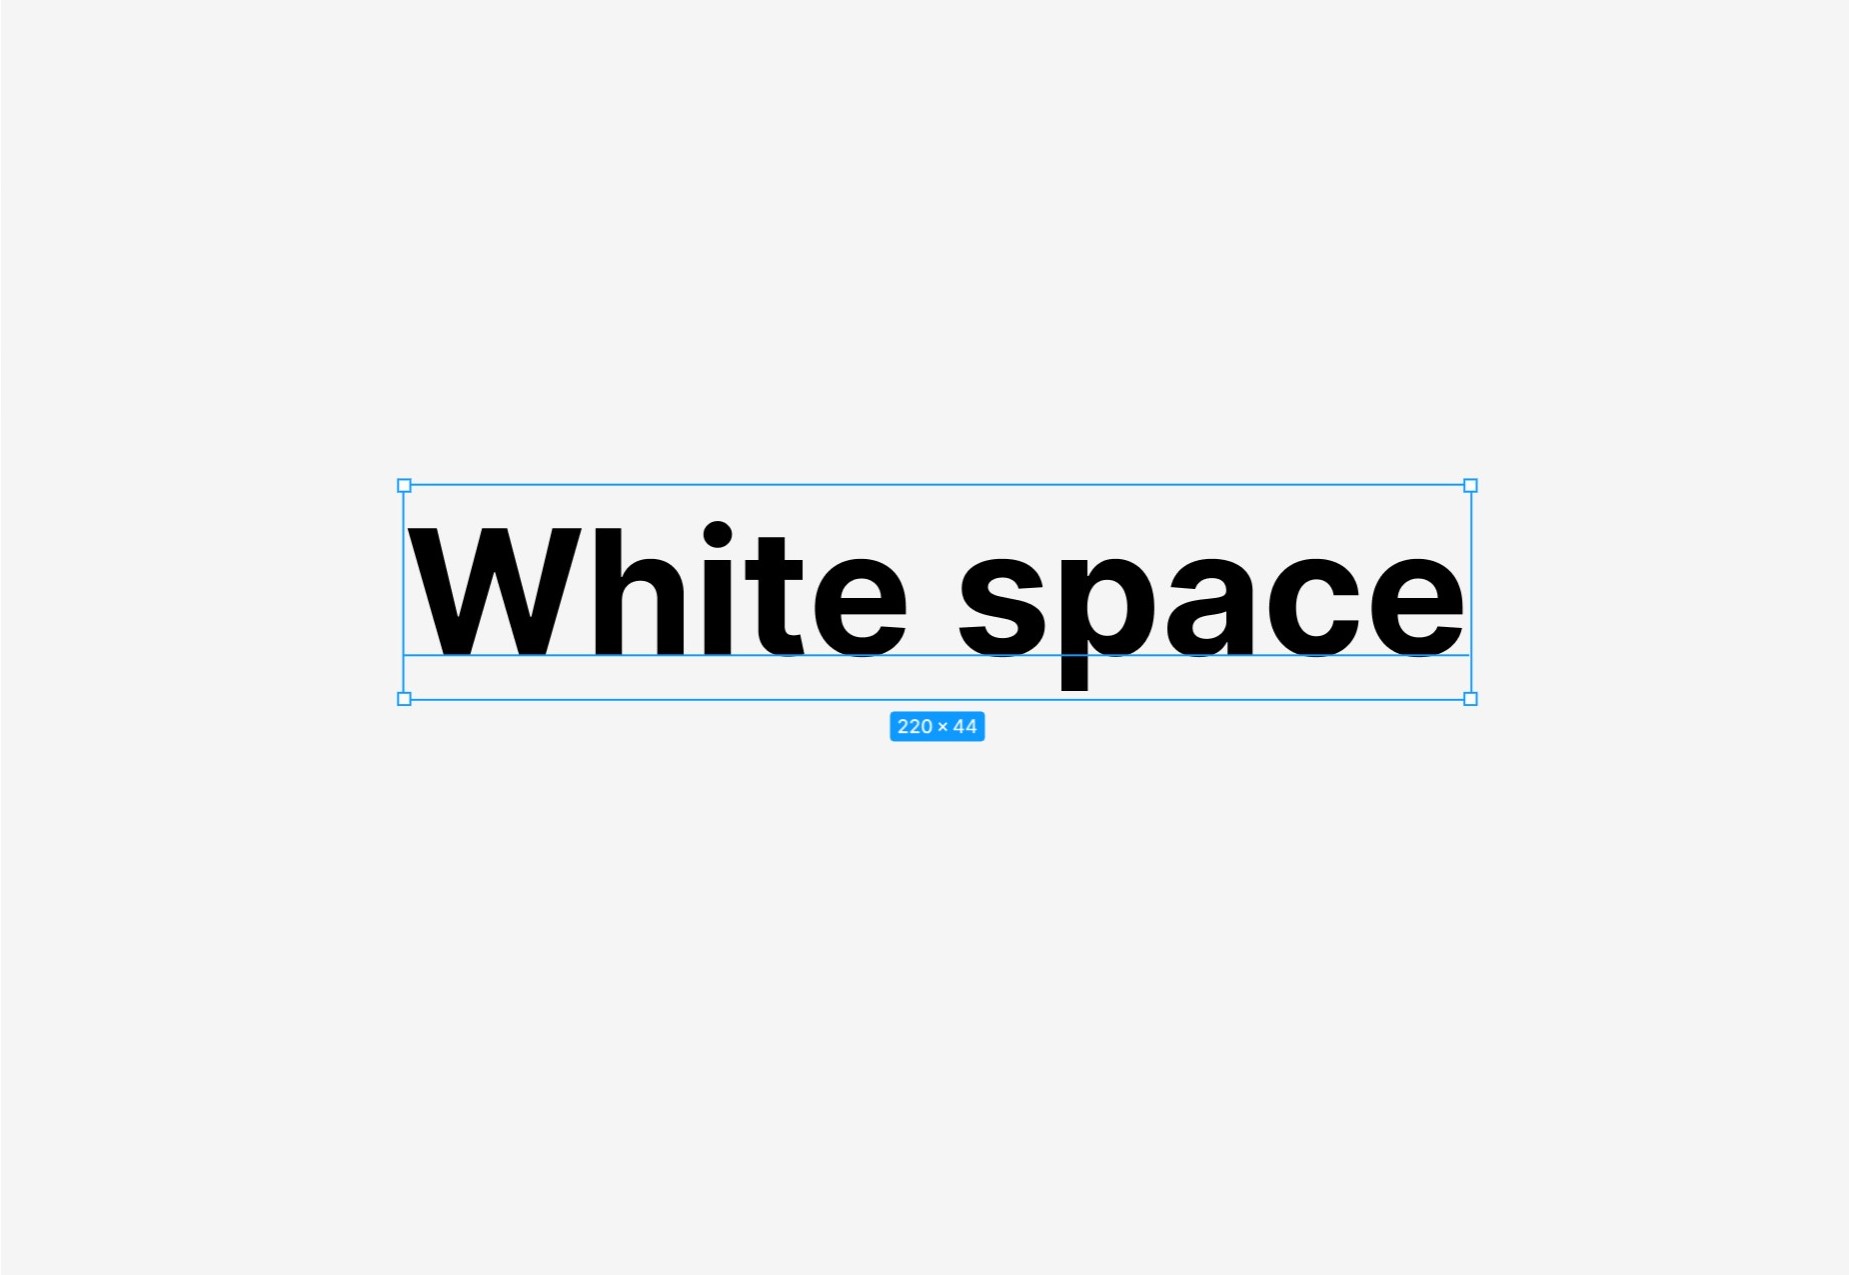 Whitespace (also known as negative space) is the empty space around the content and elements on a web page.